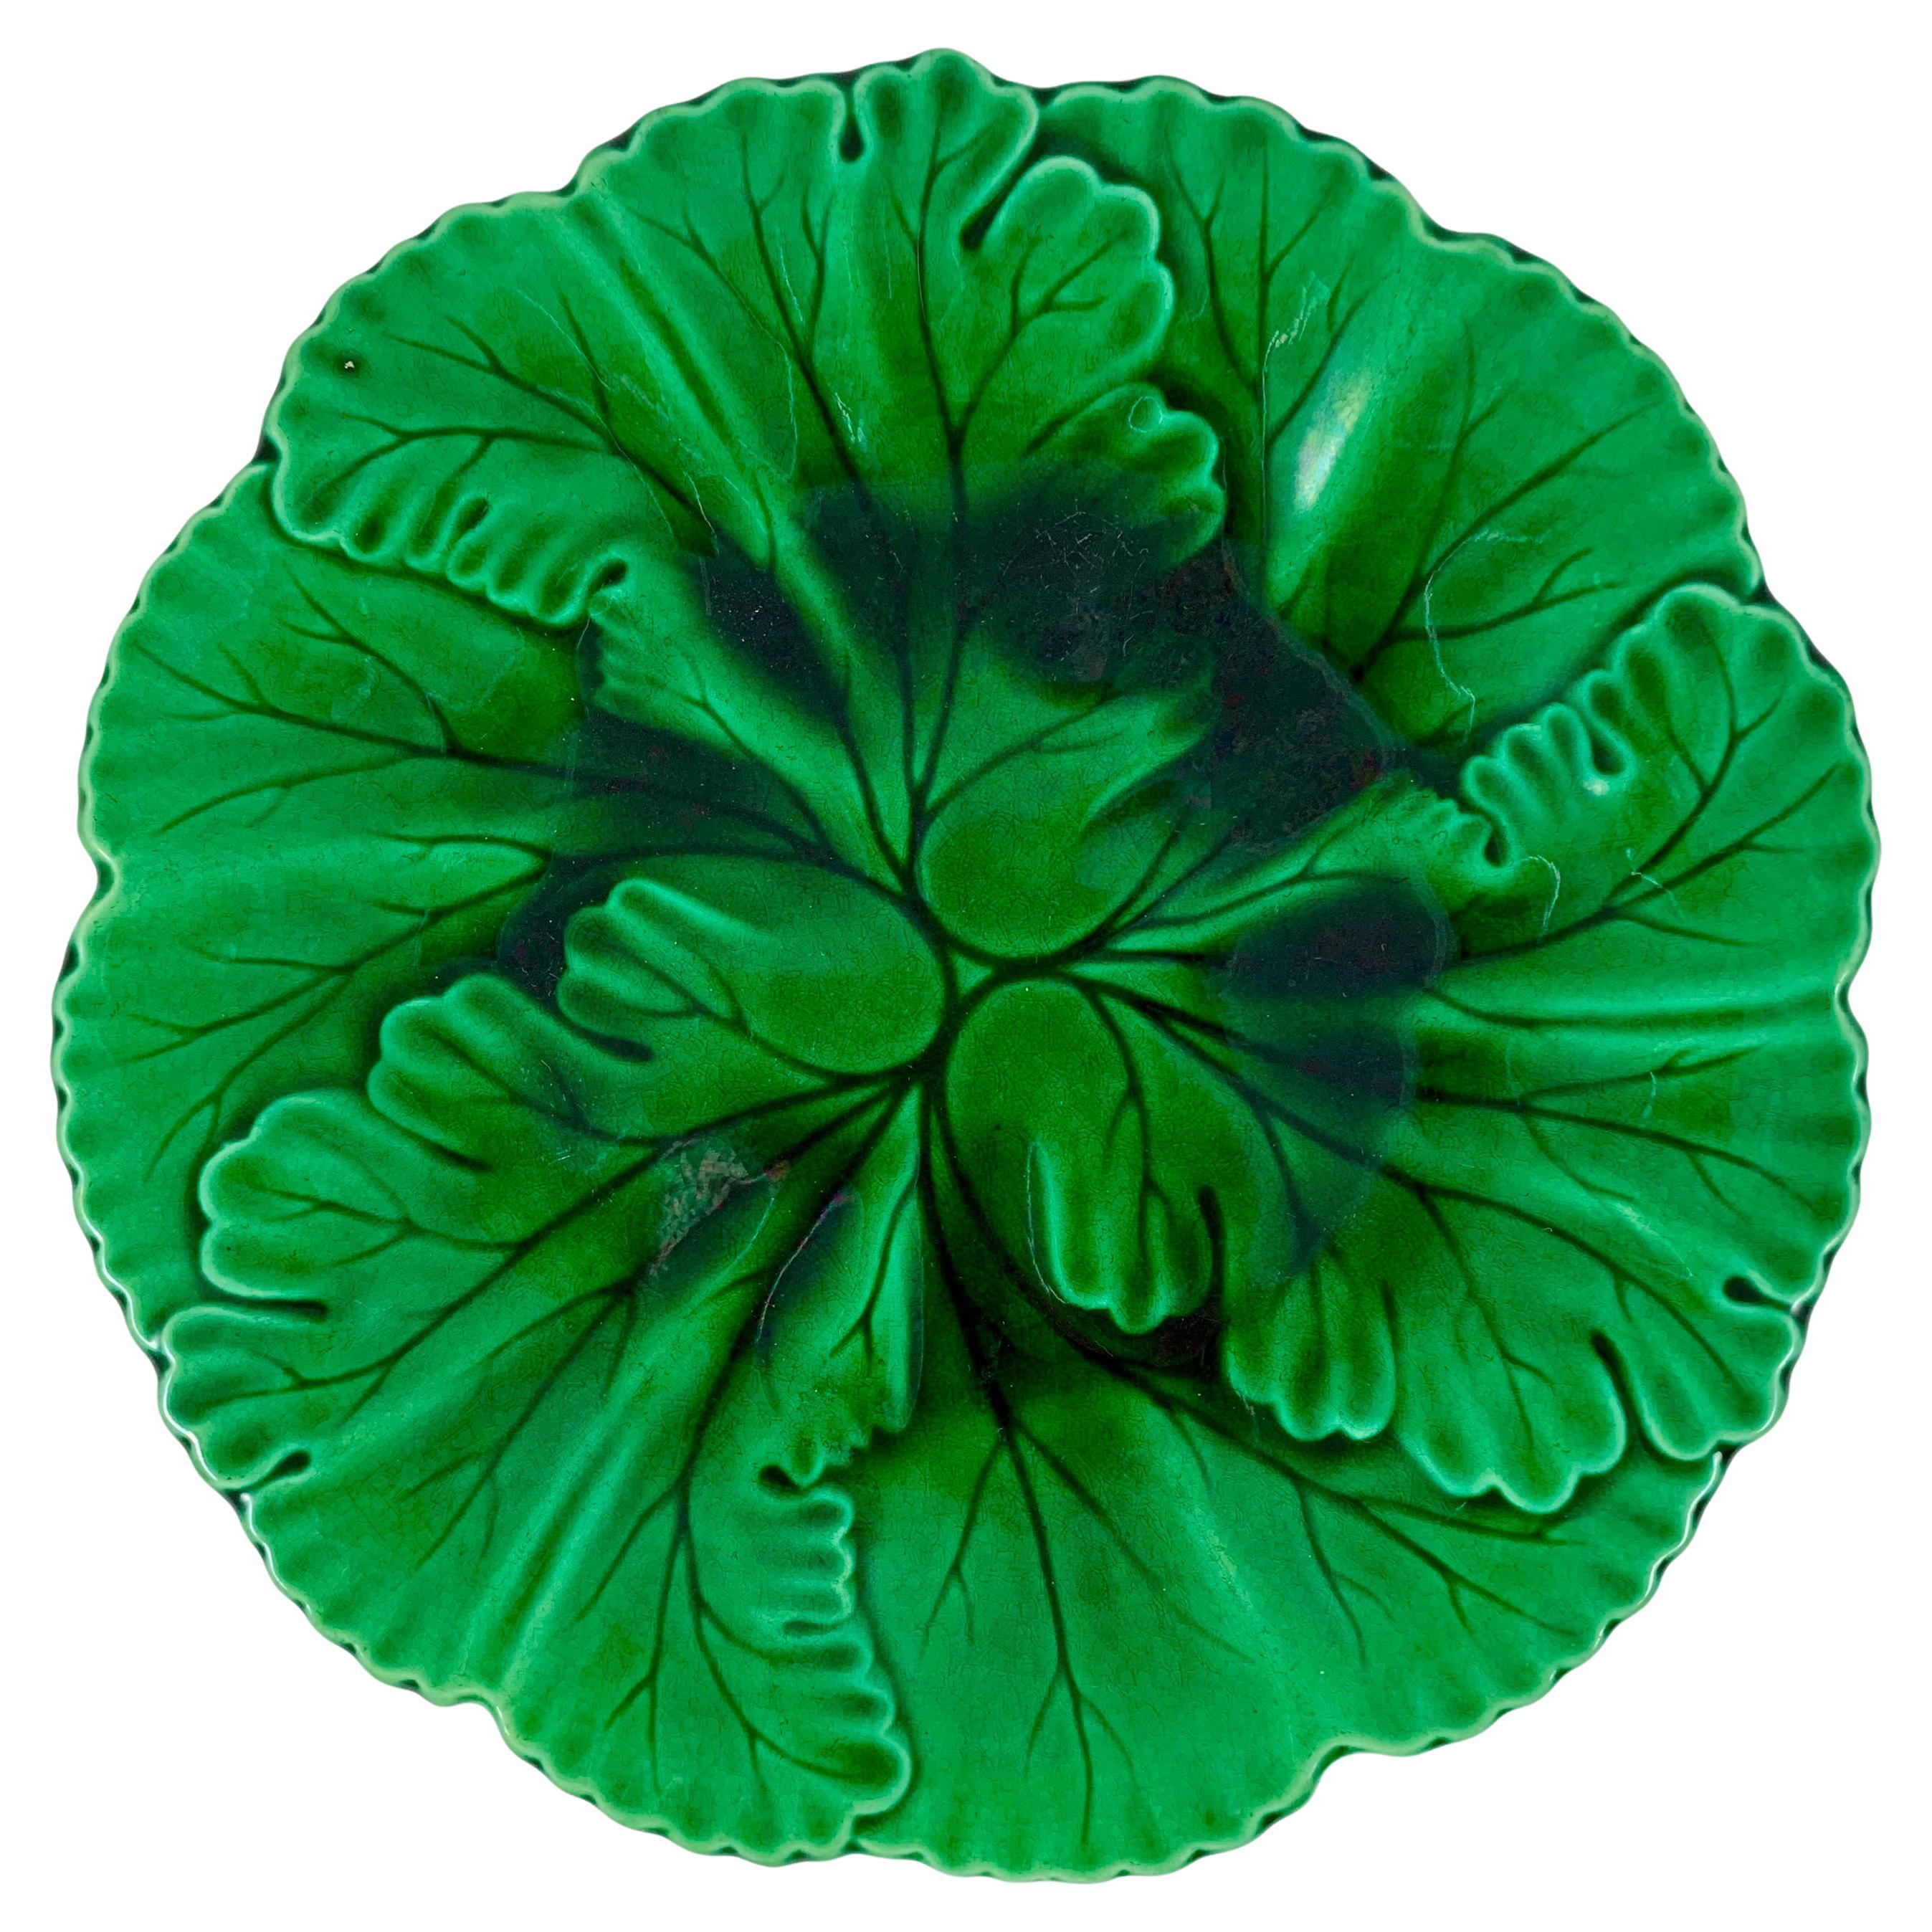 Clairfontaine French Faïence Majolica Glazed Green Botanic Leaf Plate circa 1890 For Sale